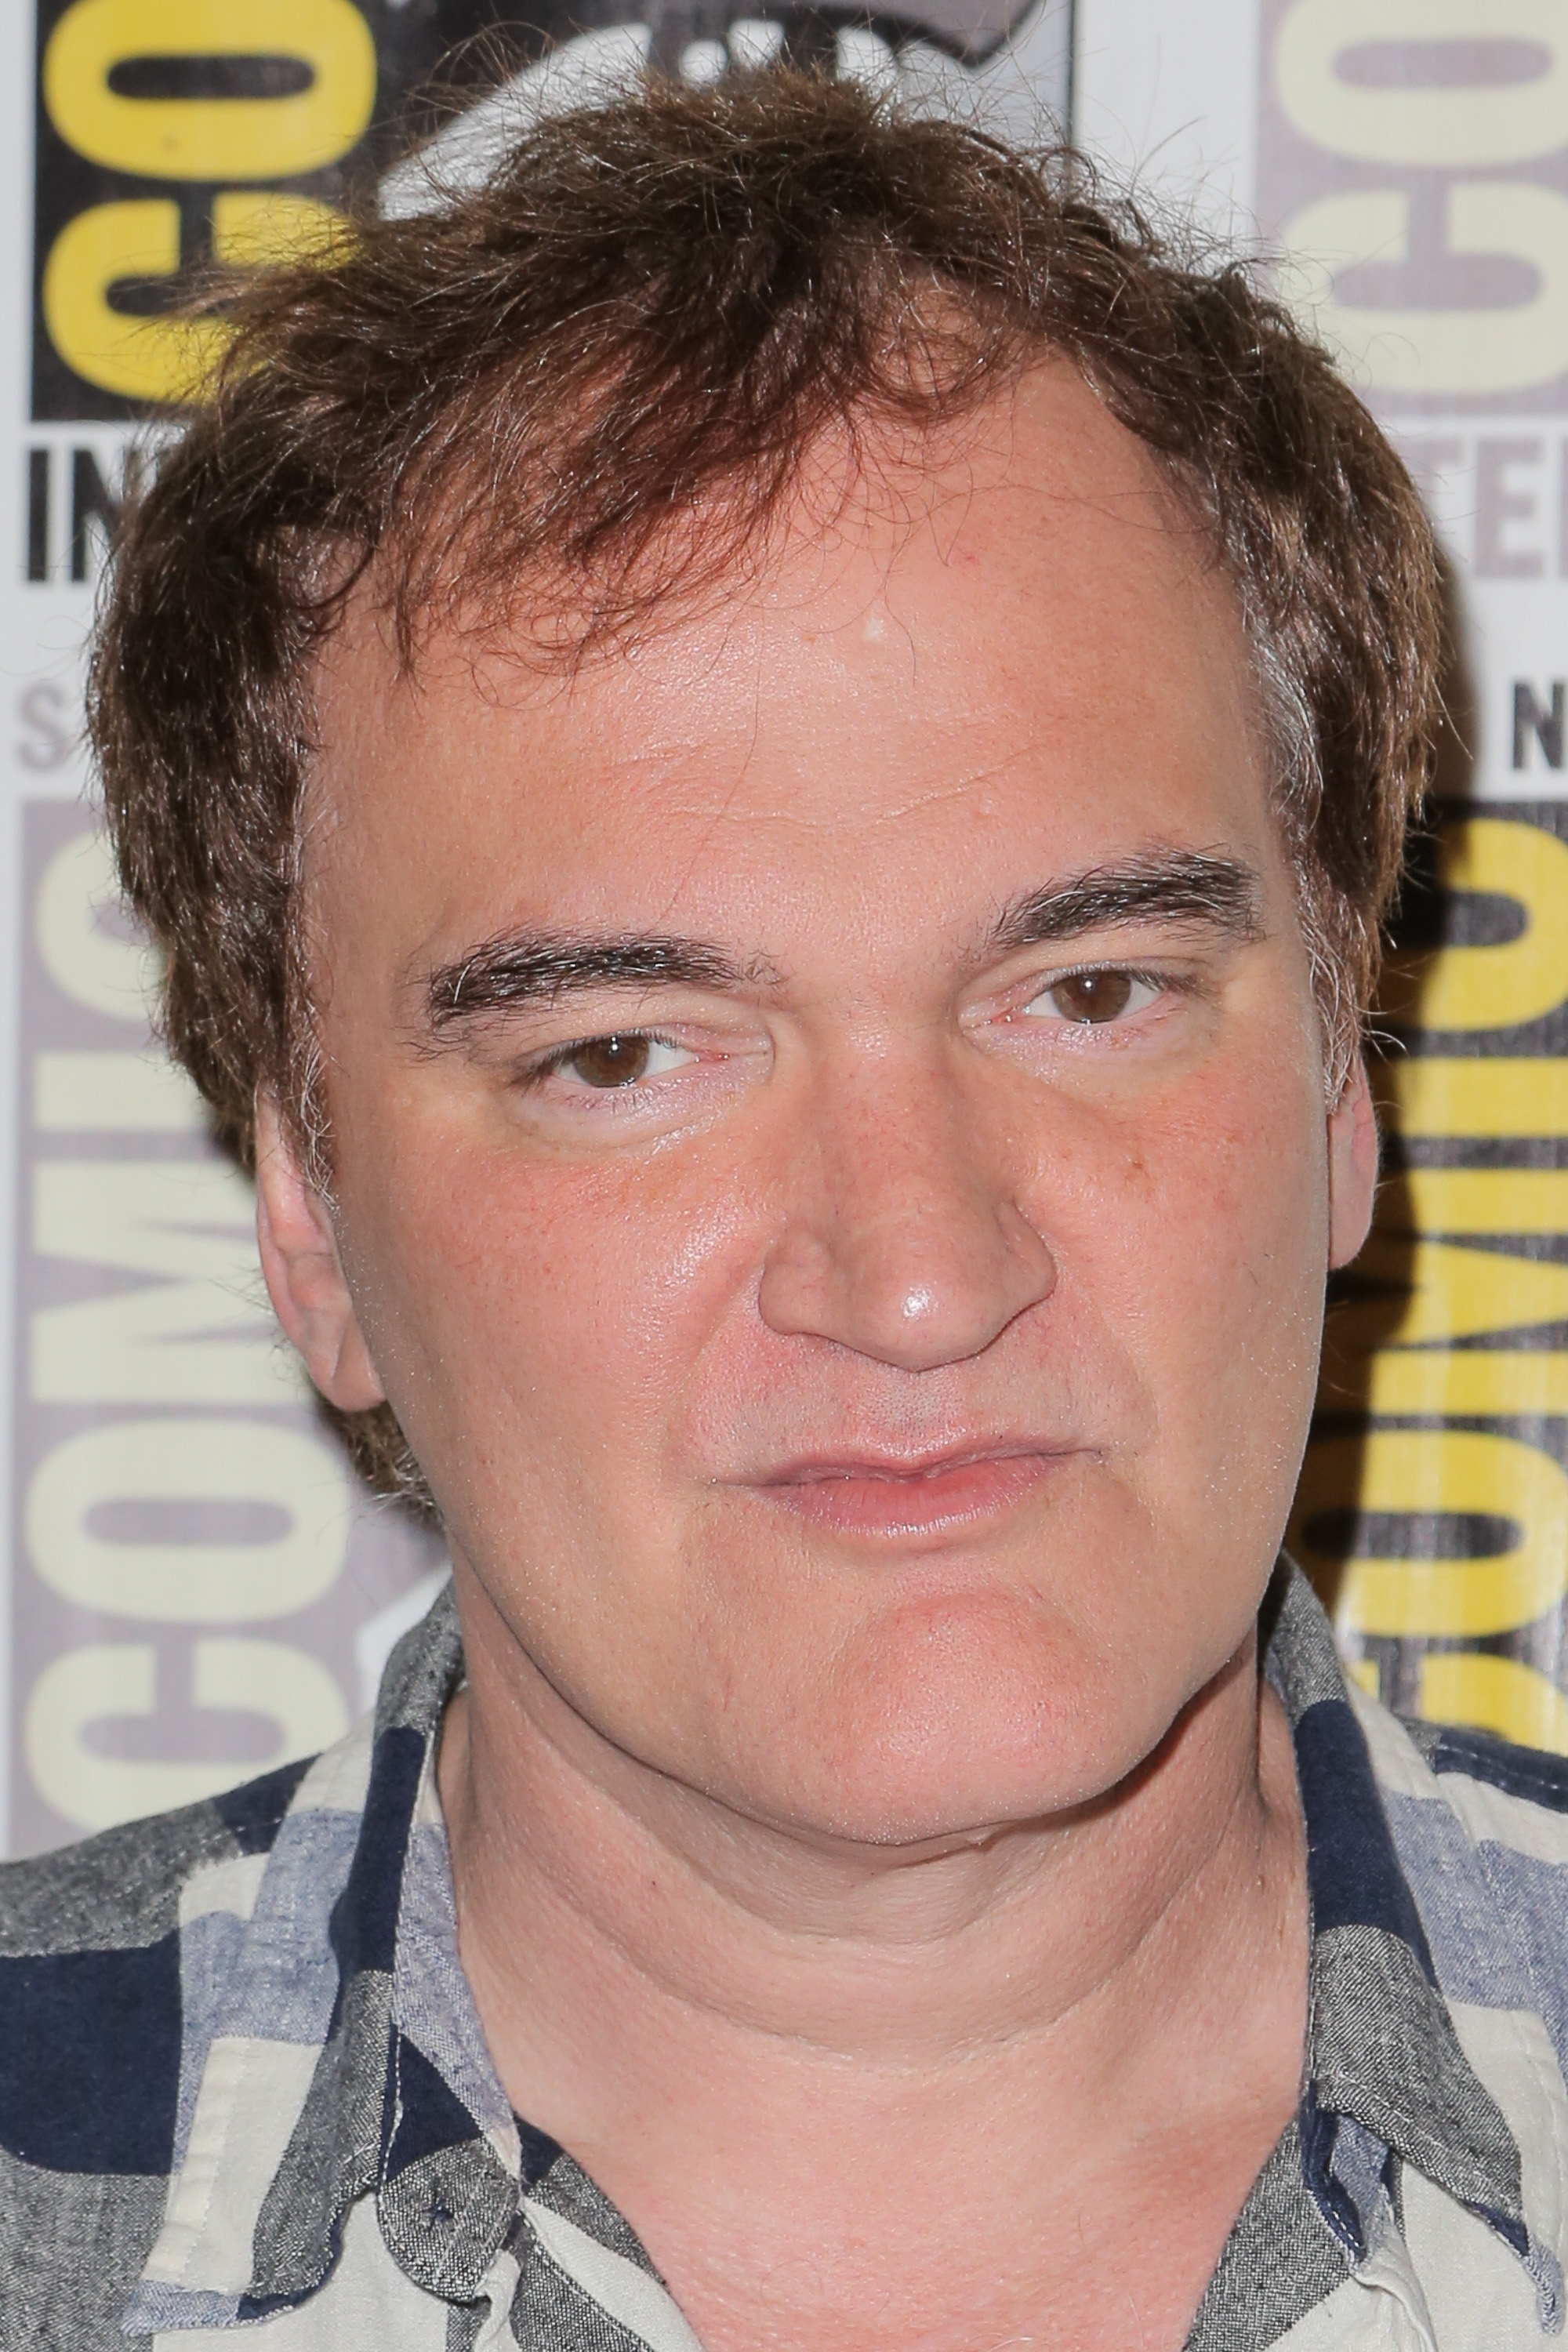 Quentin Tarantino at Comic Con International 2015 in San Diego on July 11, 2015.